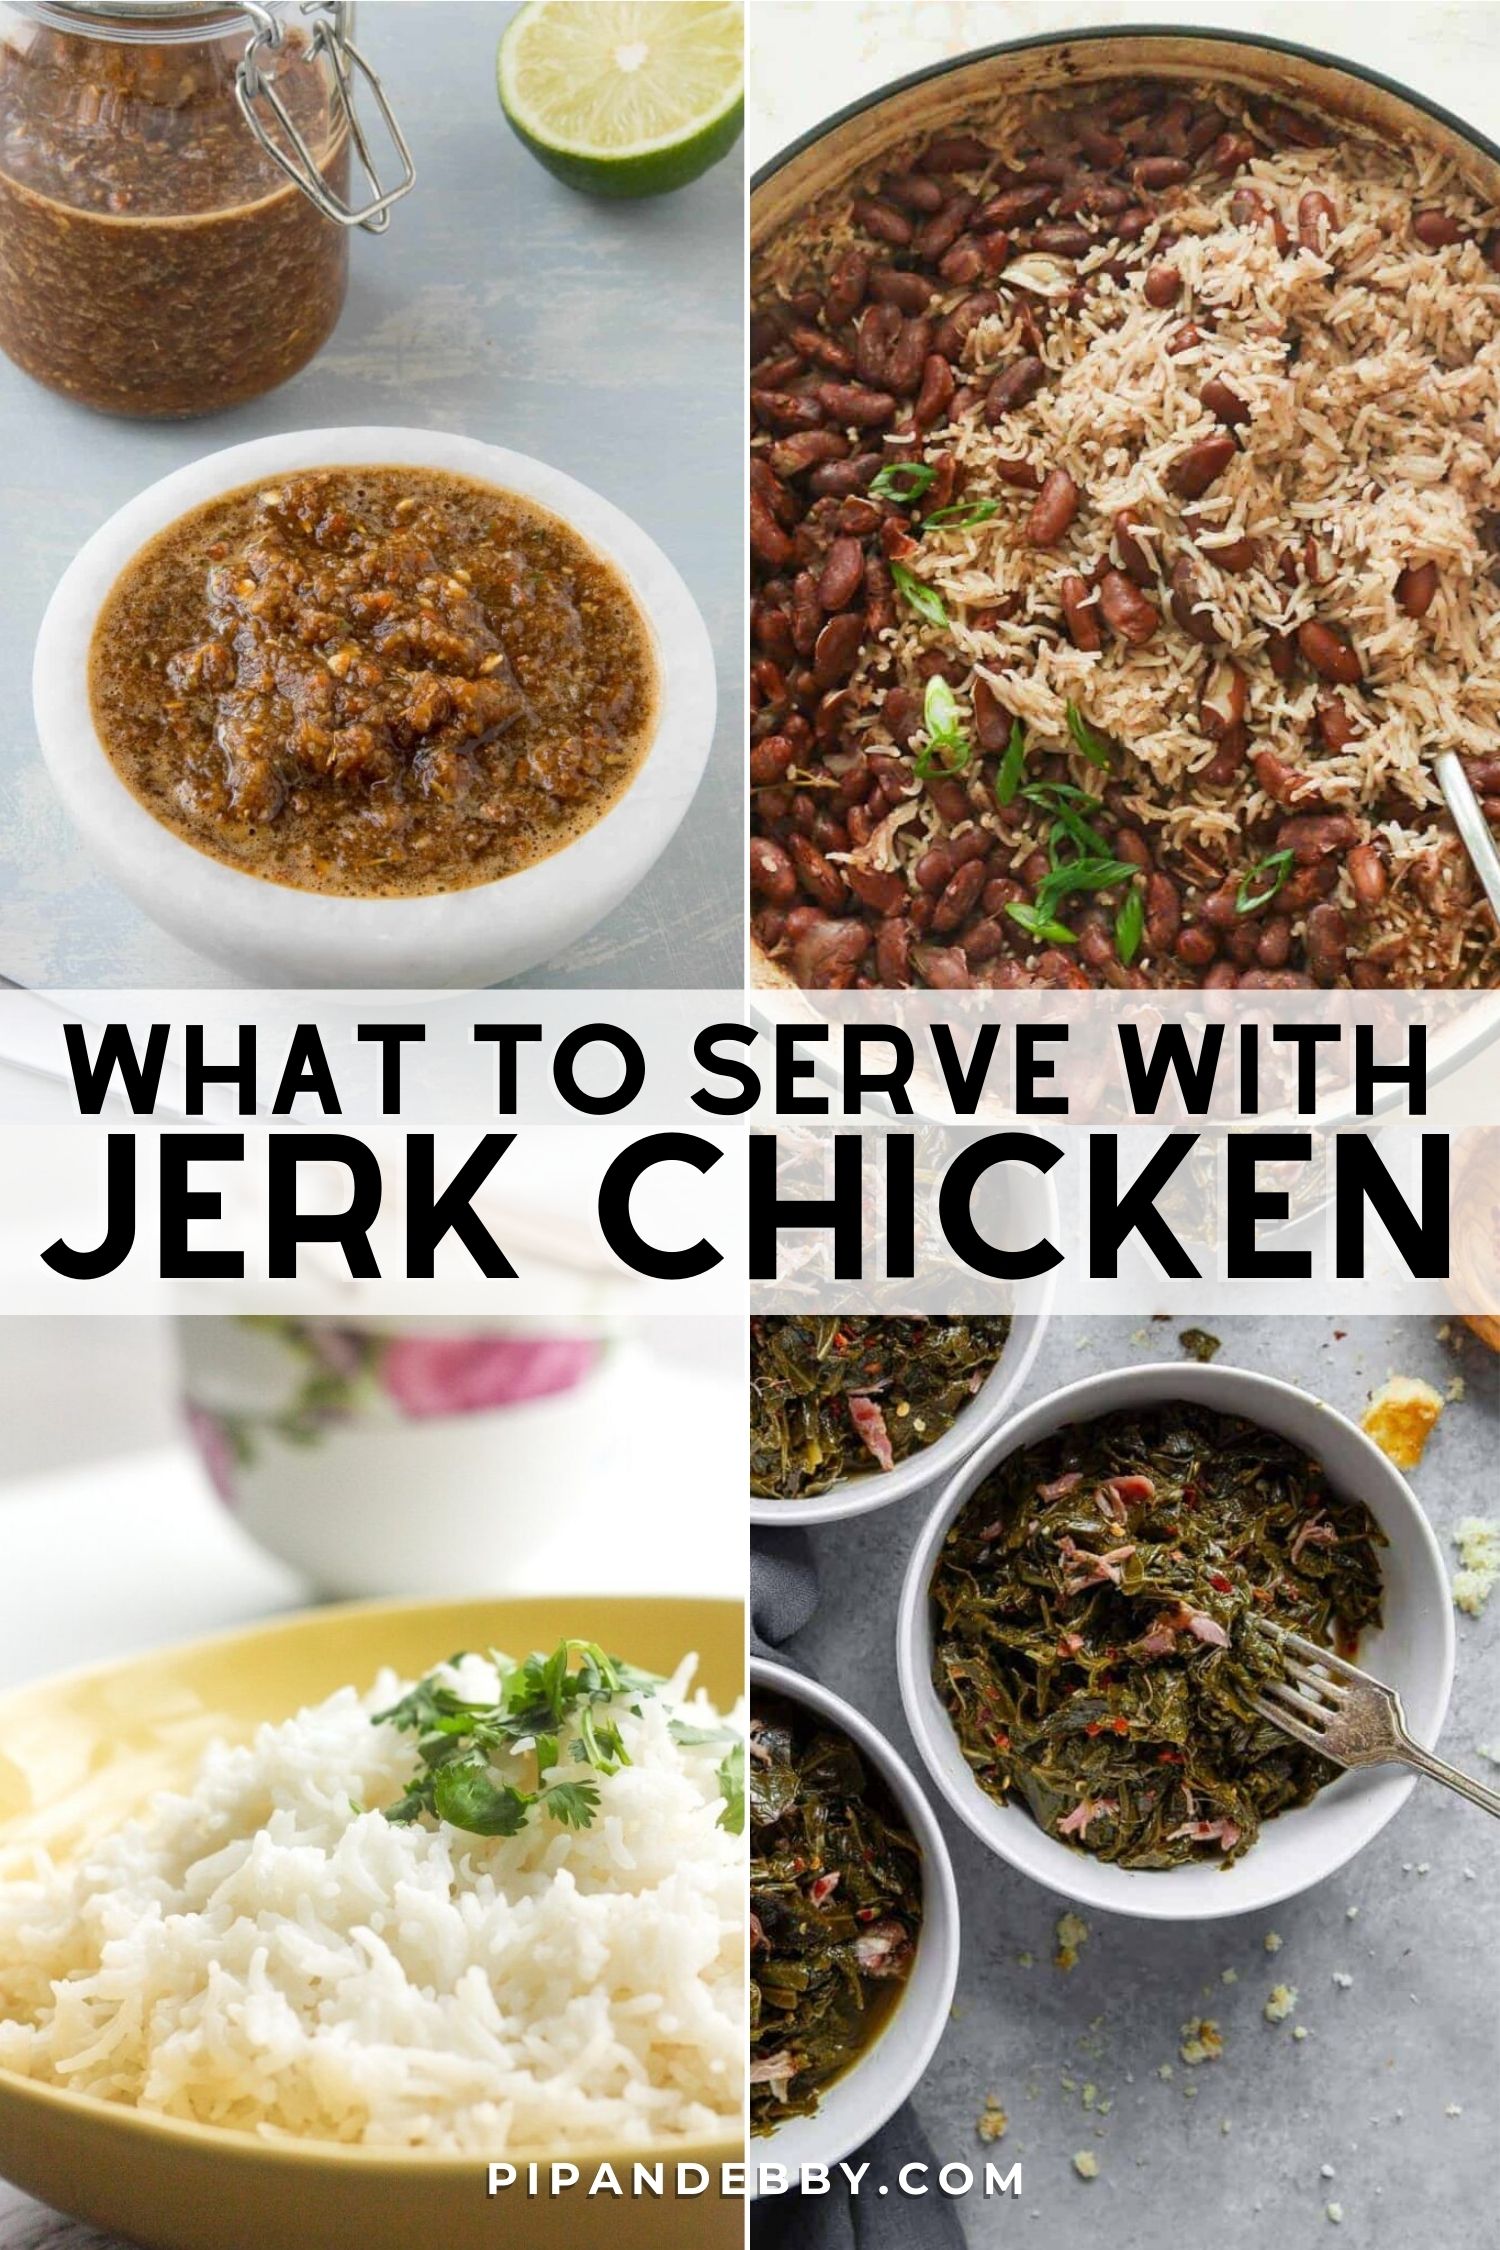 Four food photos in a grid with text overlay reading, "What to serve with jerk chicken."